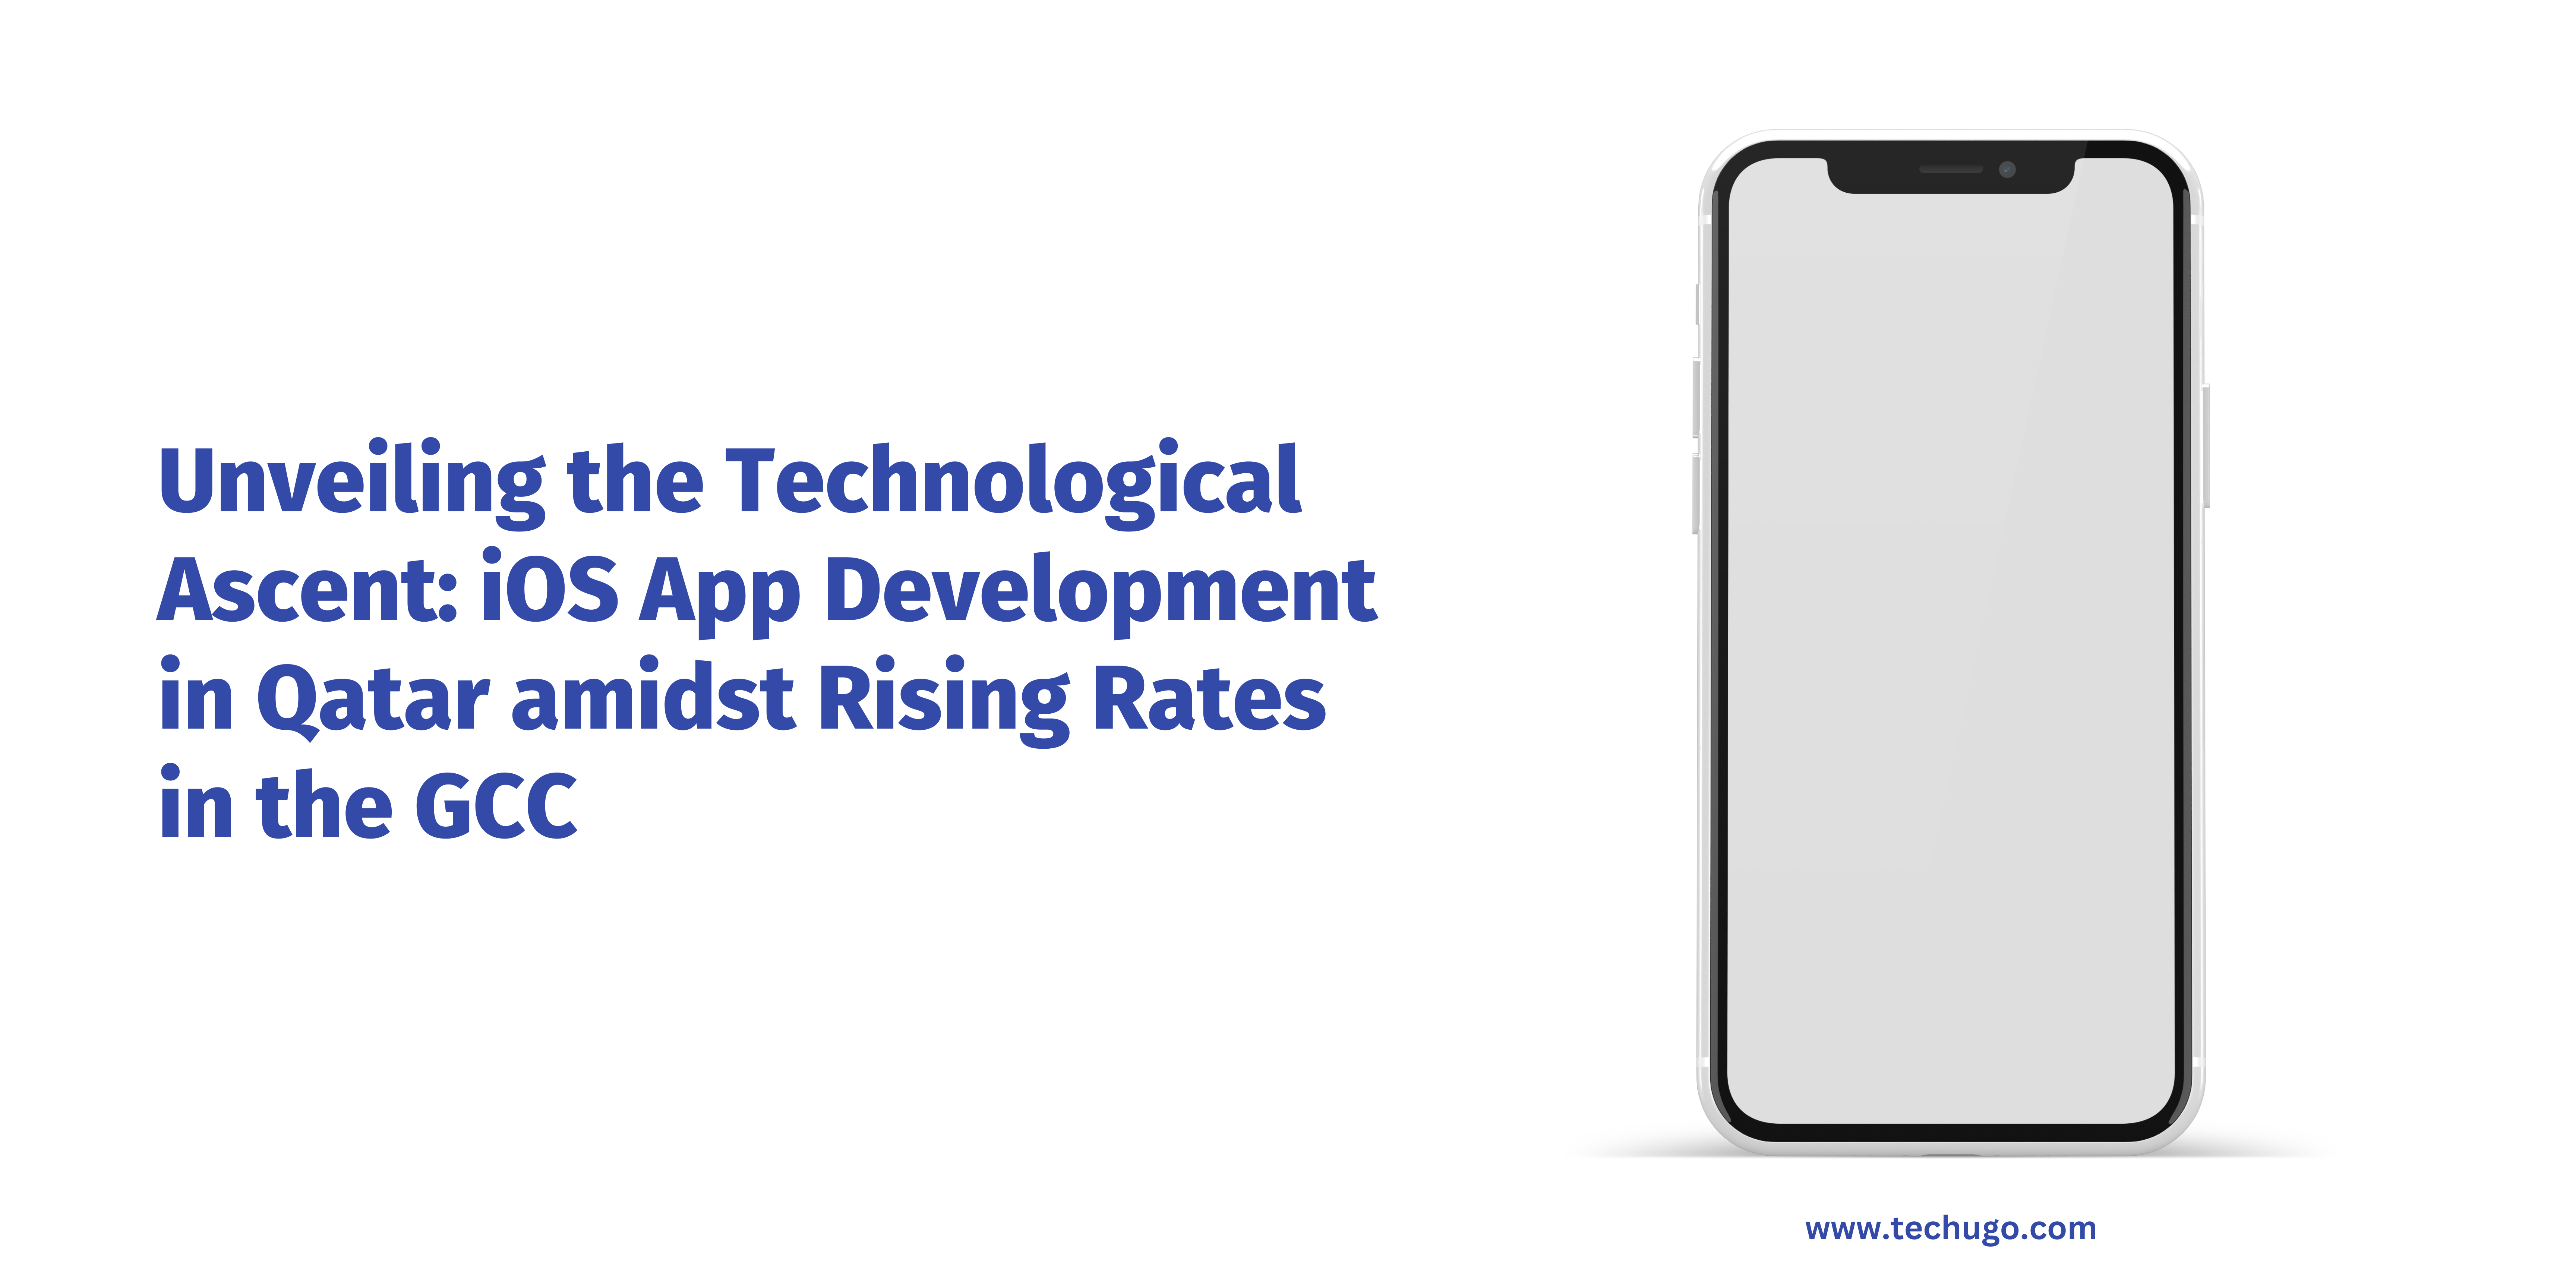 Unveiling the Technological Ascent: iOS App Development in Qatar amidst Rising Rates in the GCC